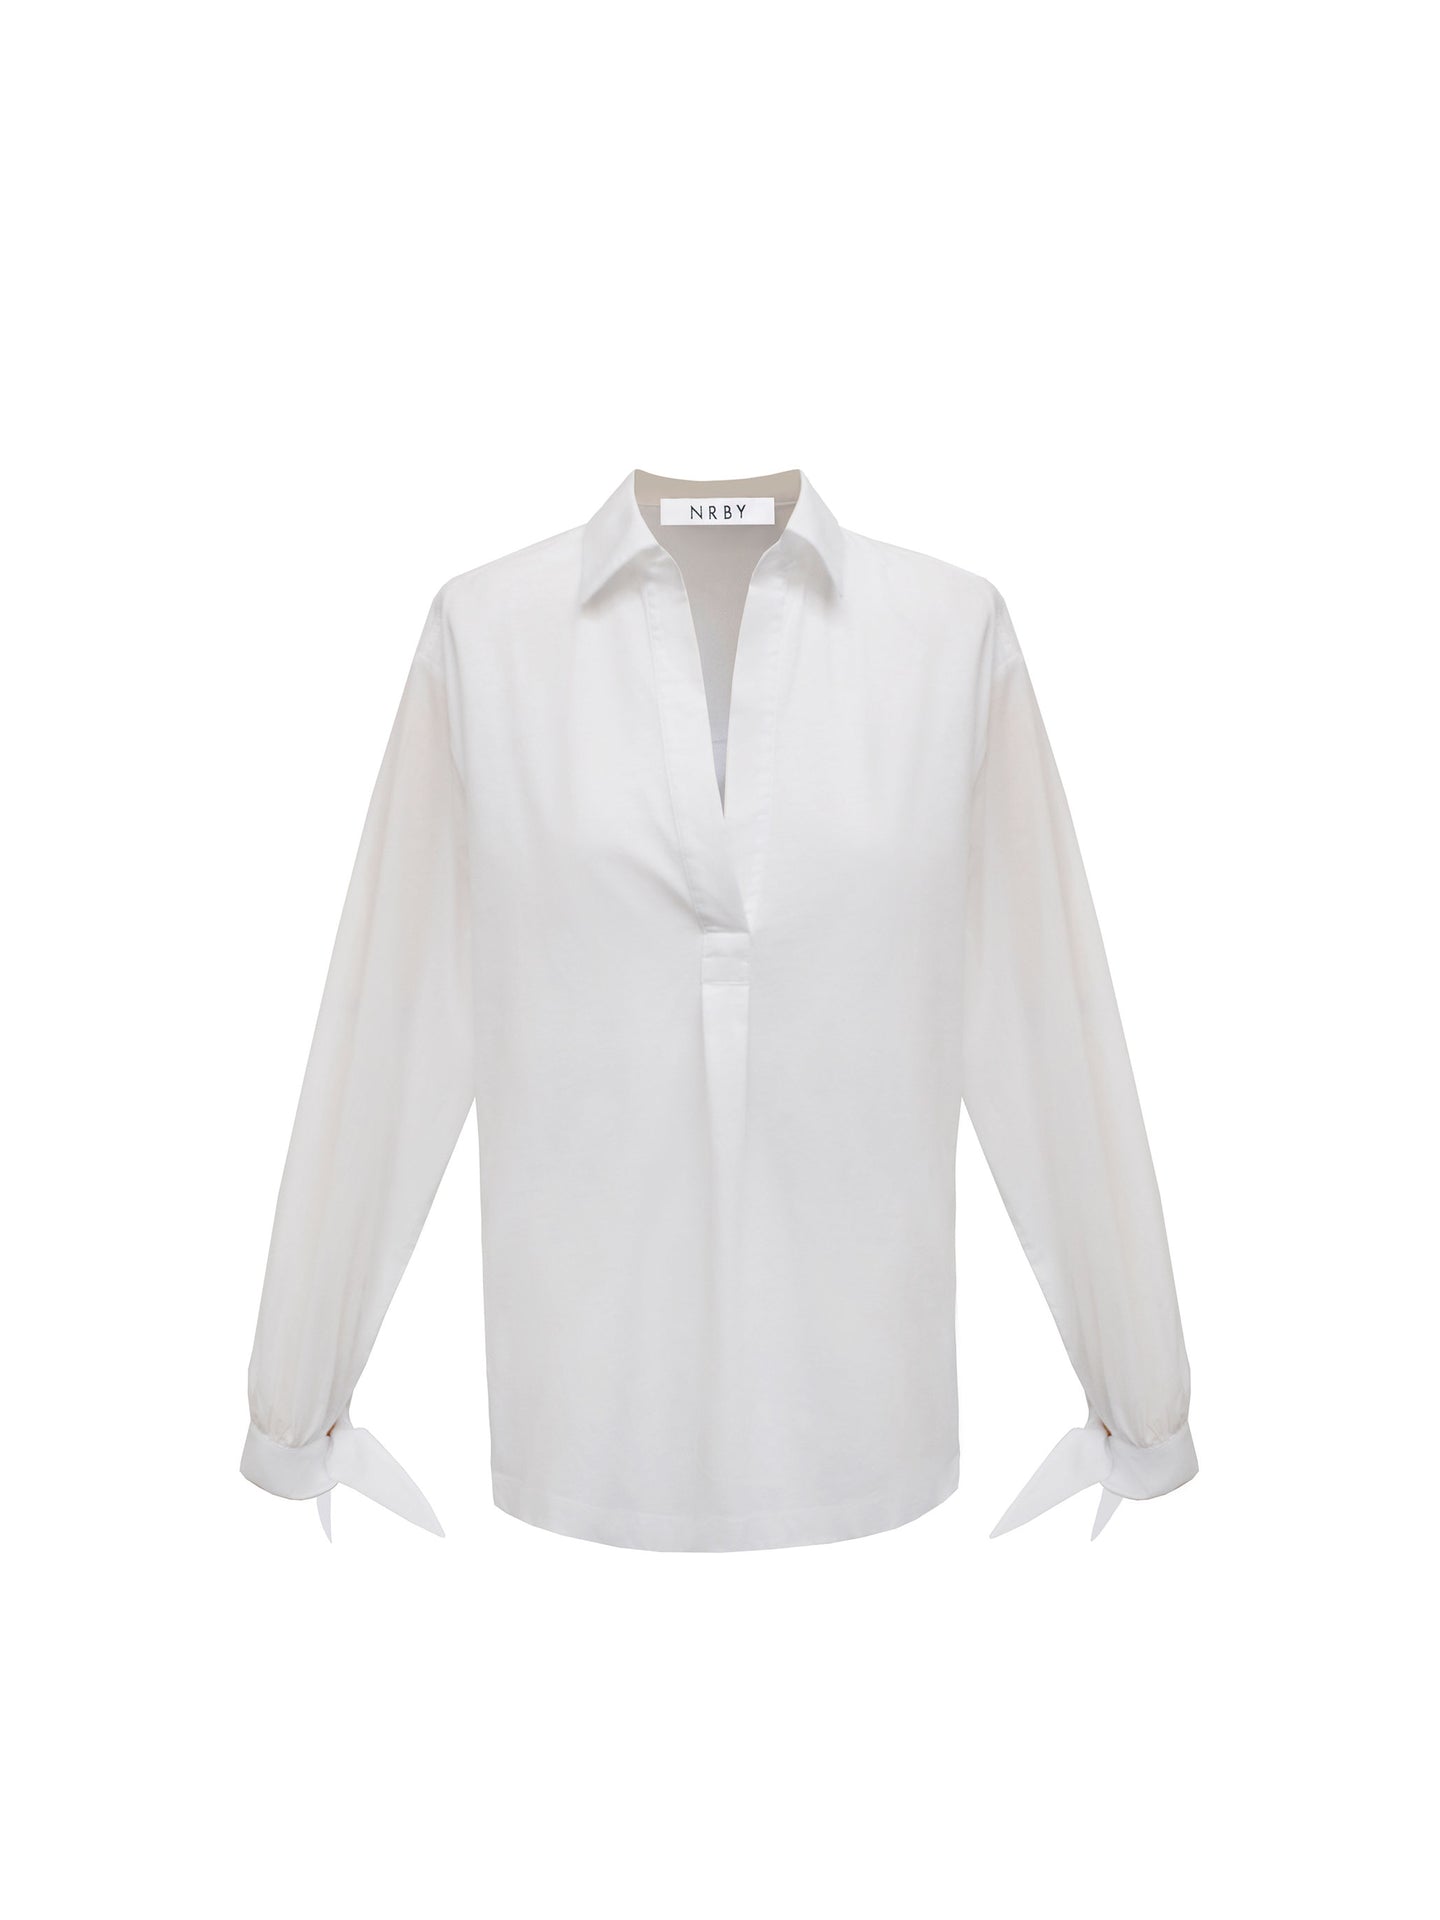 Romi jersey and cotton tie cuff shirt - White